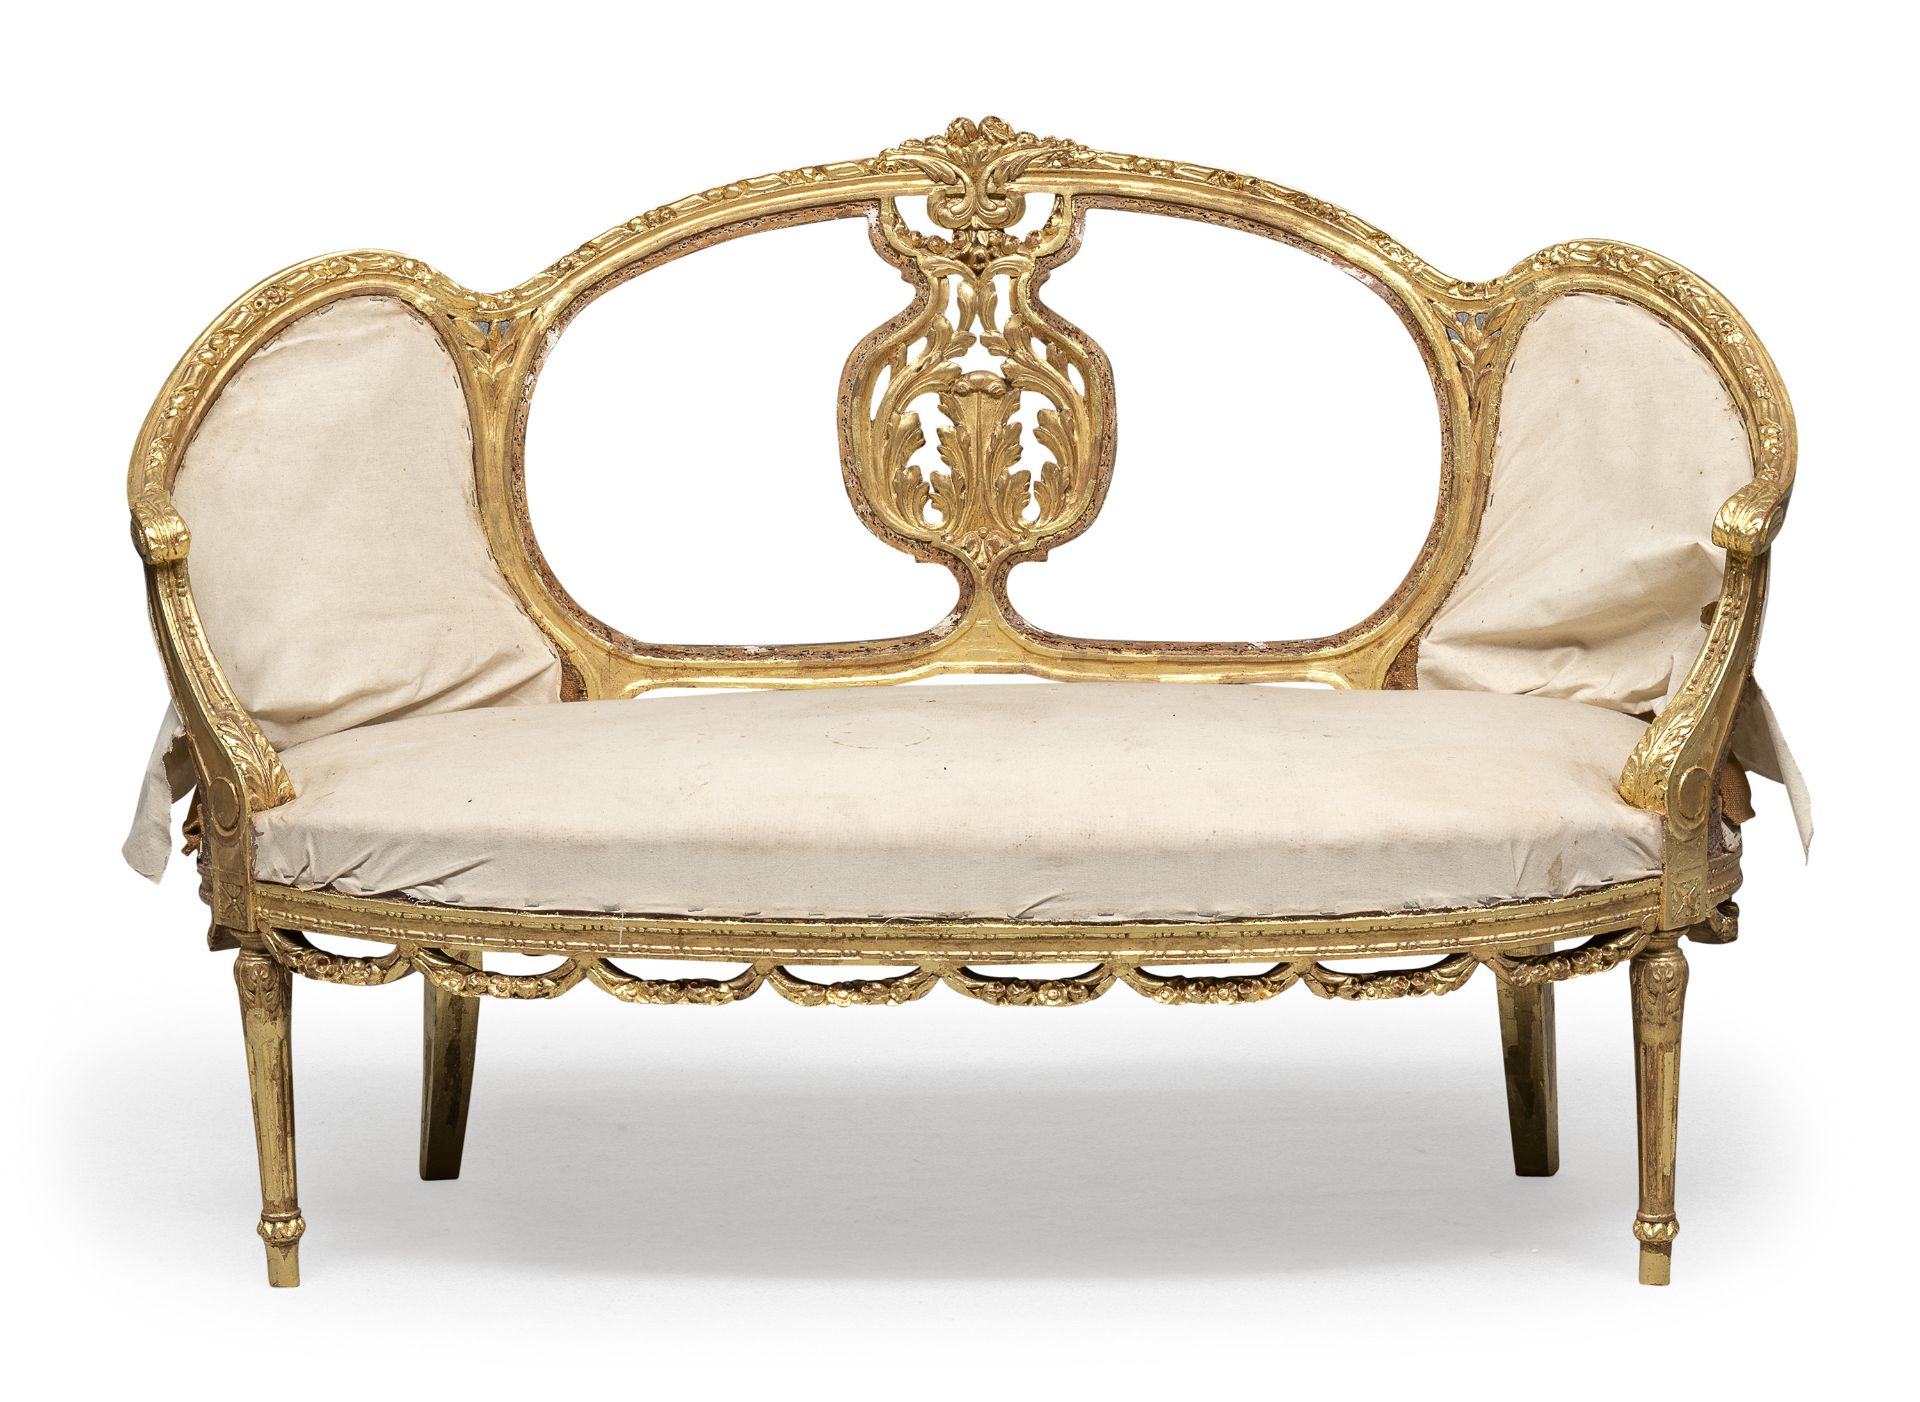 CORBEILLE SOFA IN GILTWOOD ANTIQUE ELEMENTS